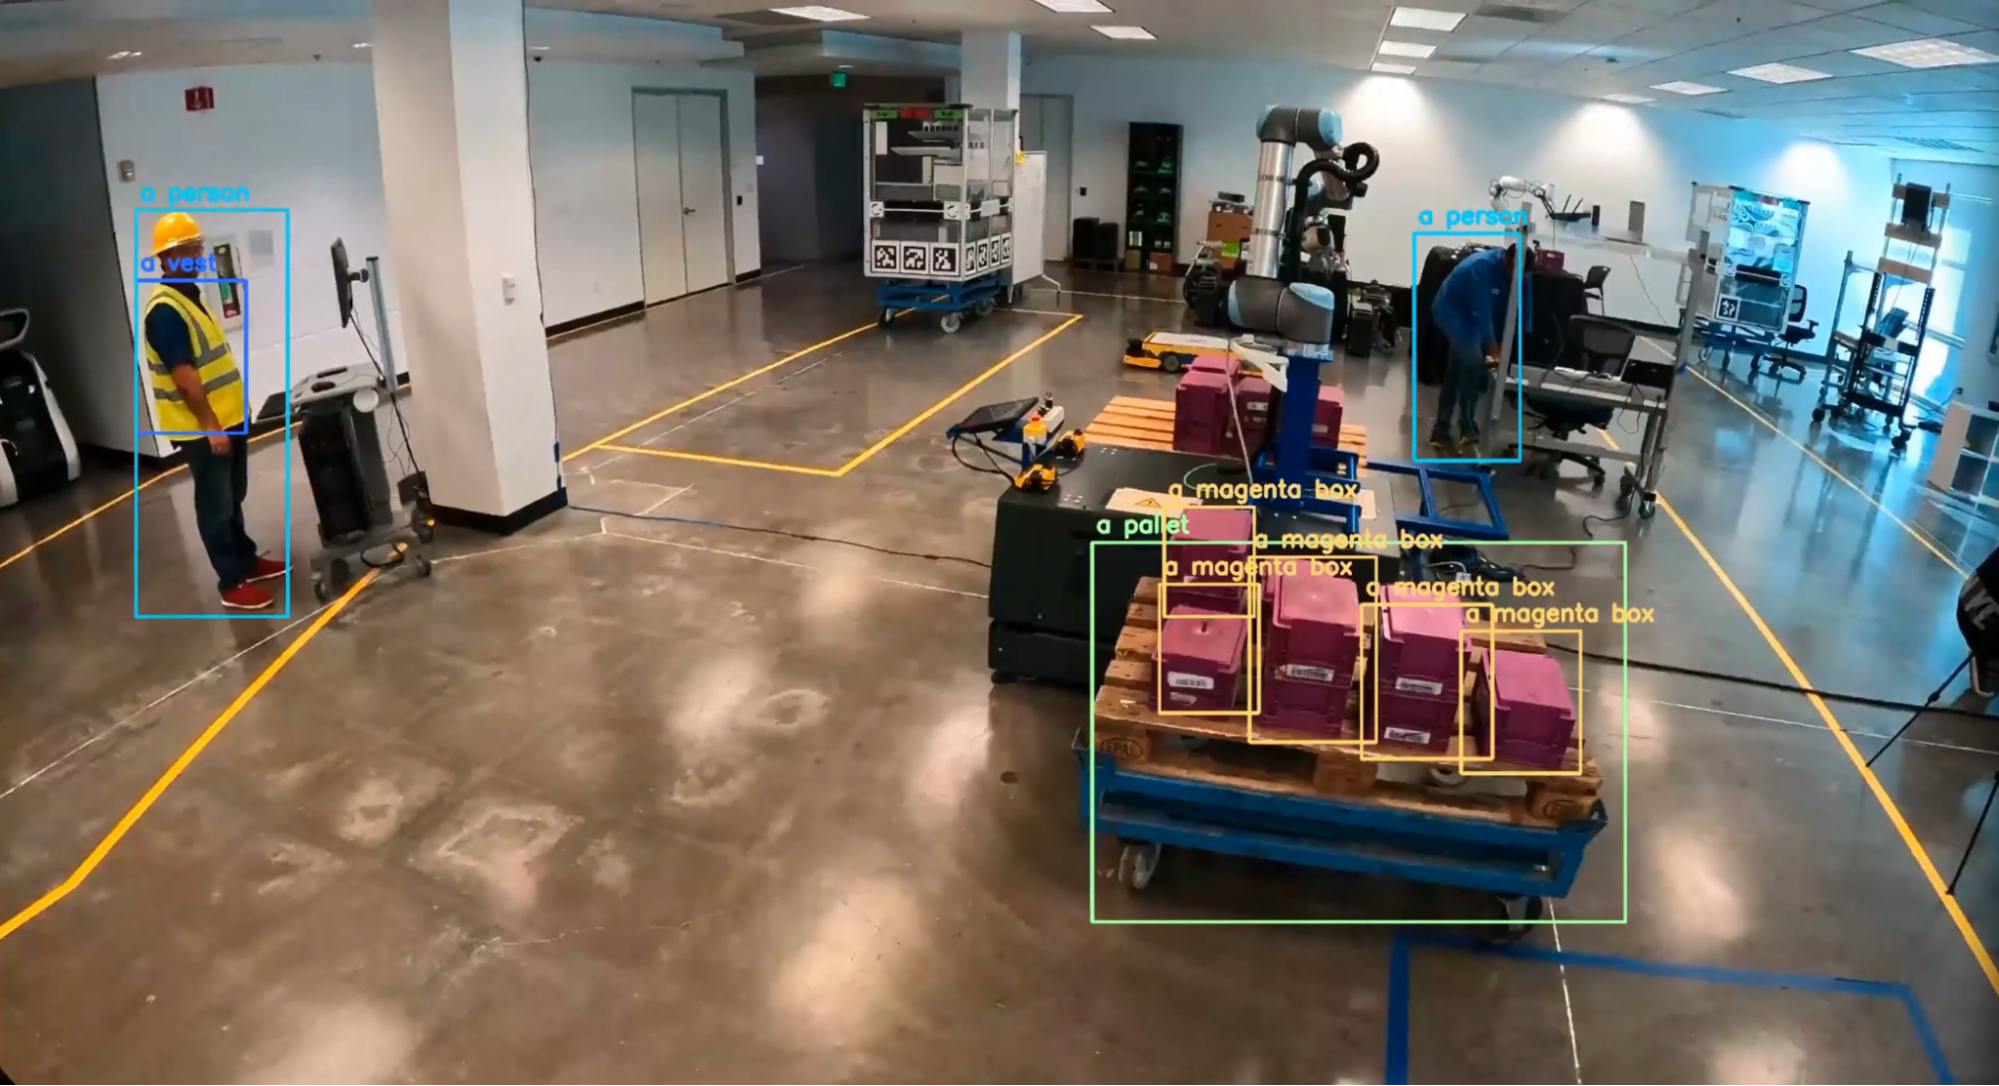 Image shows a factory floor with people, pallets, and equipment delineated by labeled bounding boxes. 